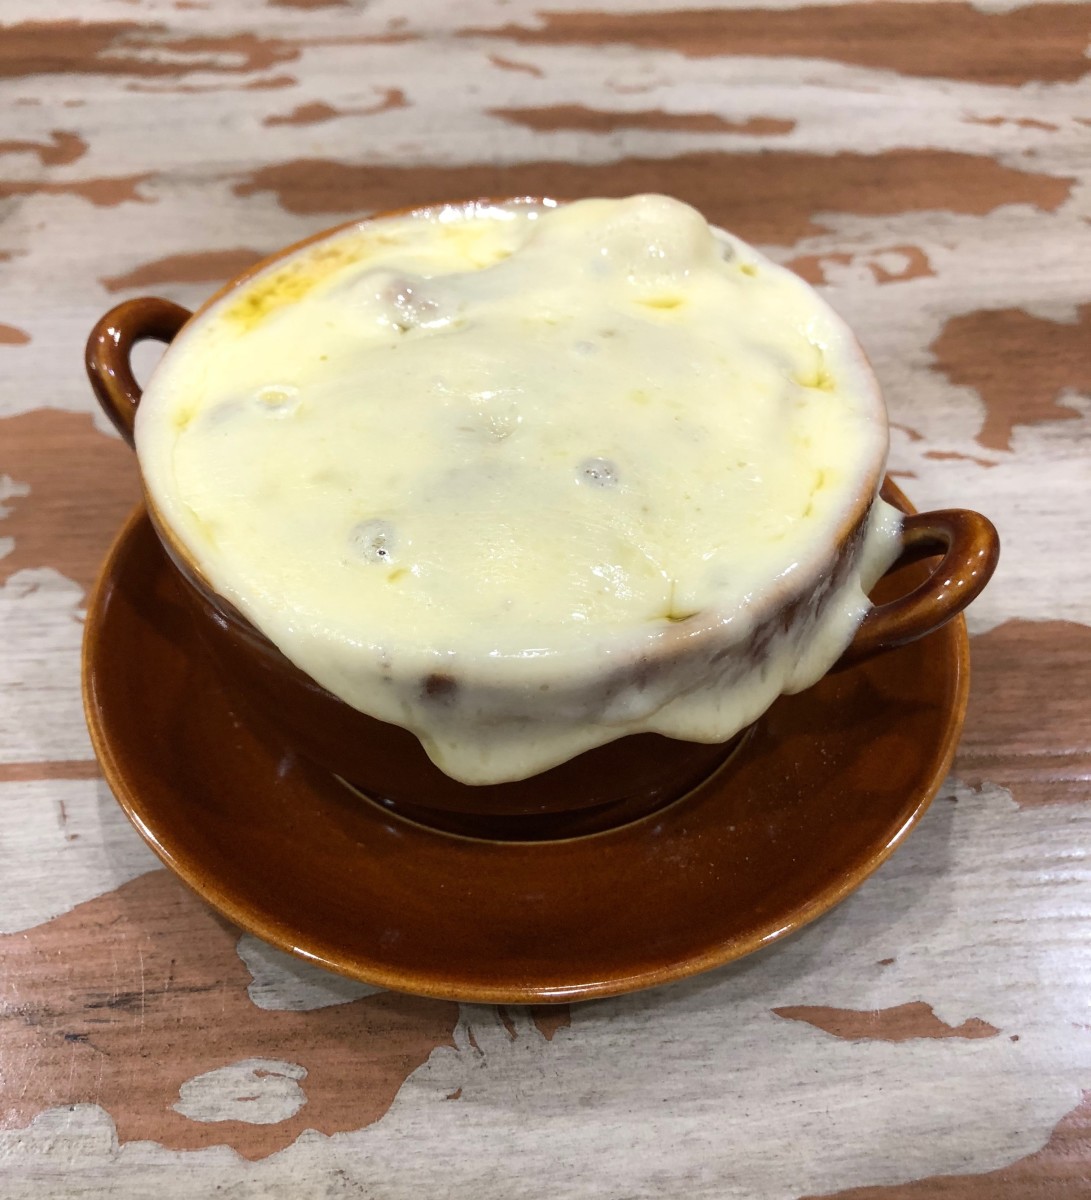 The cheese is melted and the soup is ready to serve.